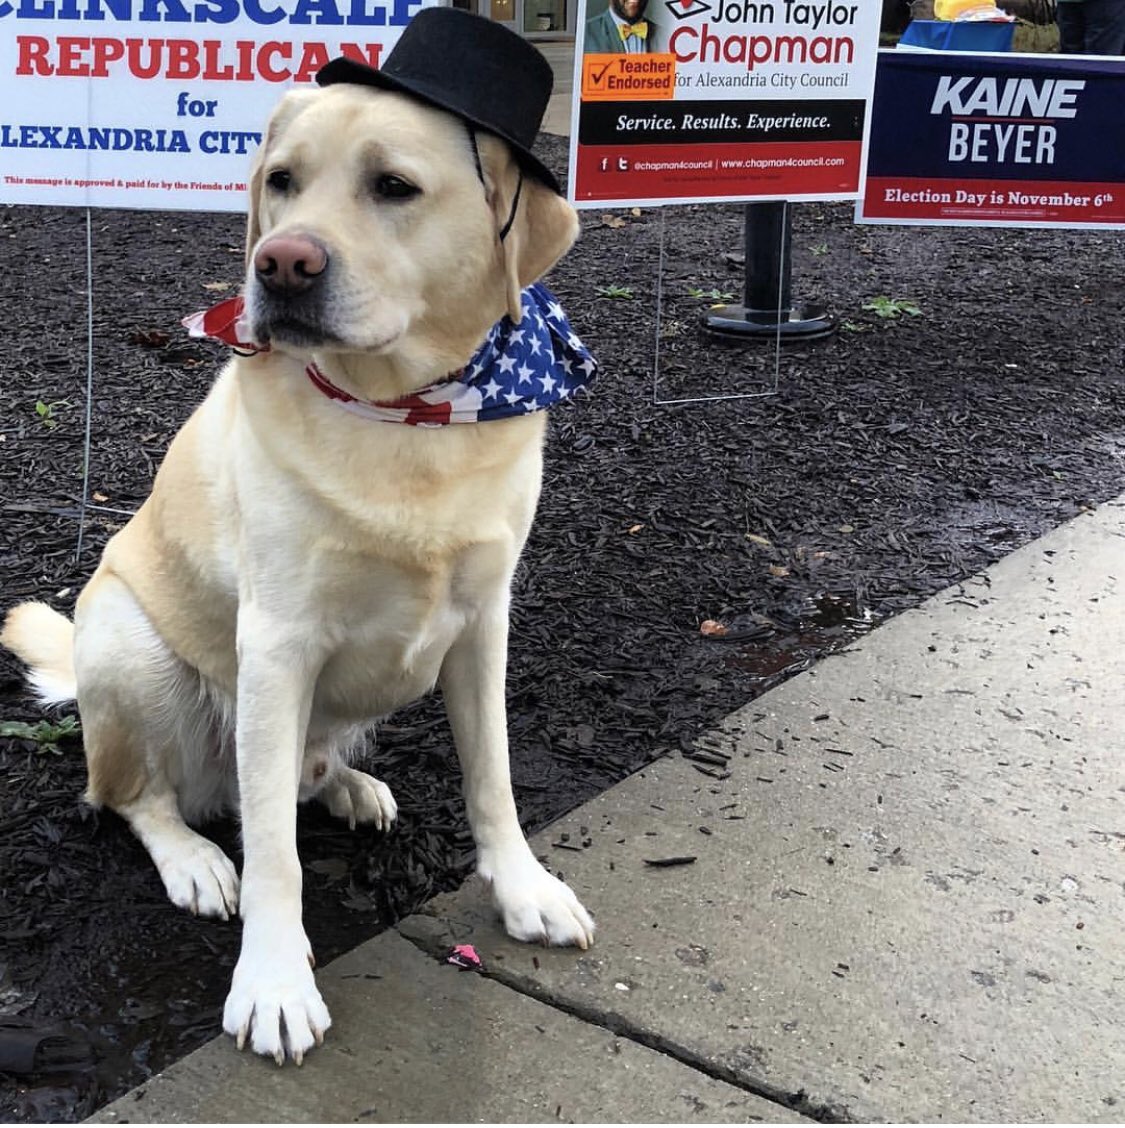 I’m happy to report Gadsden Boots won his reelection for mayor 🇺🇸🗳#ElectionDay2018